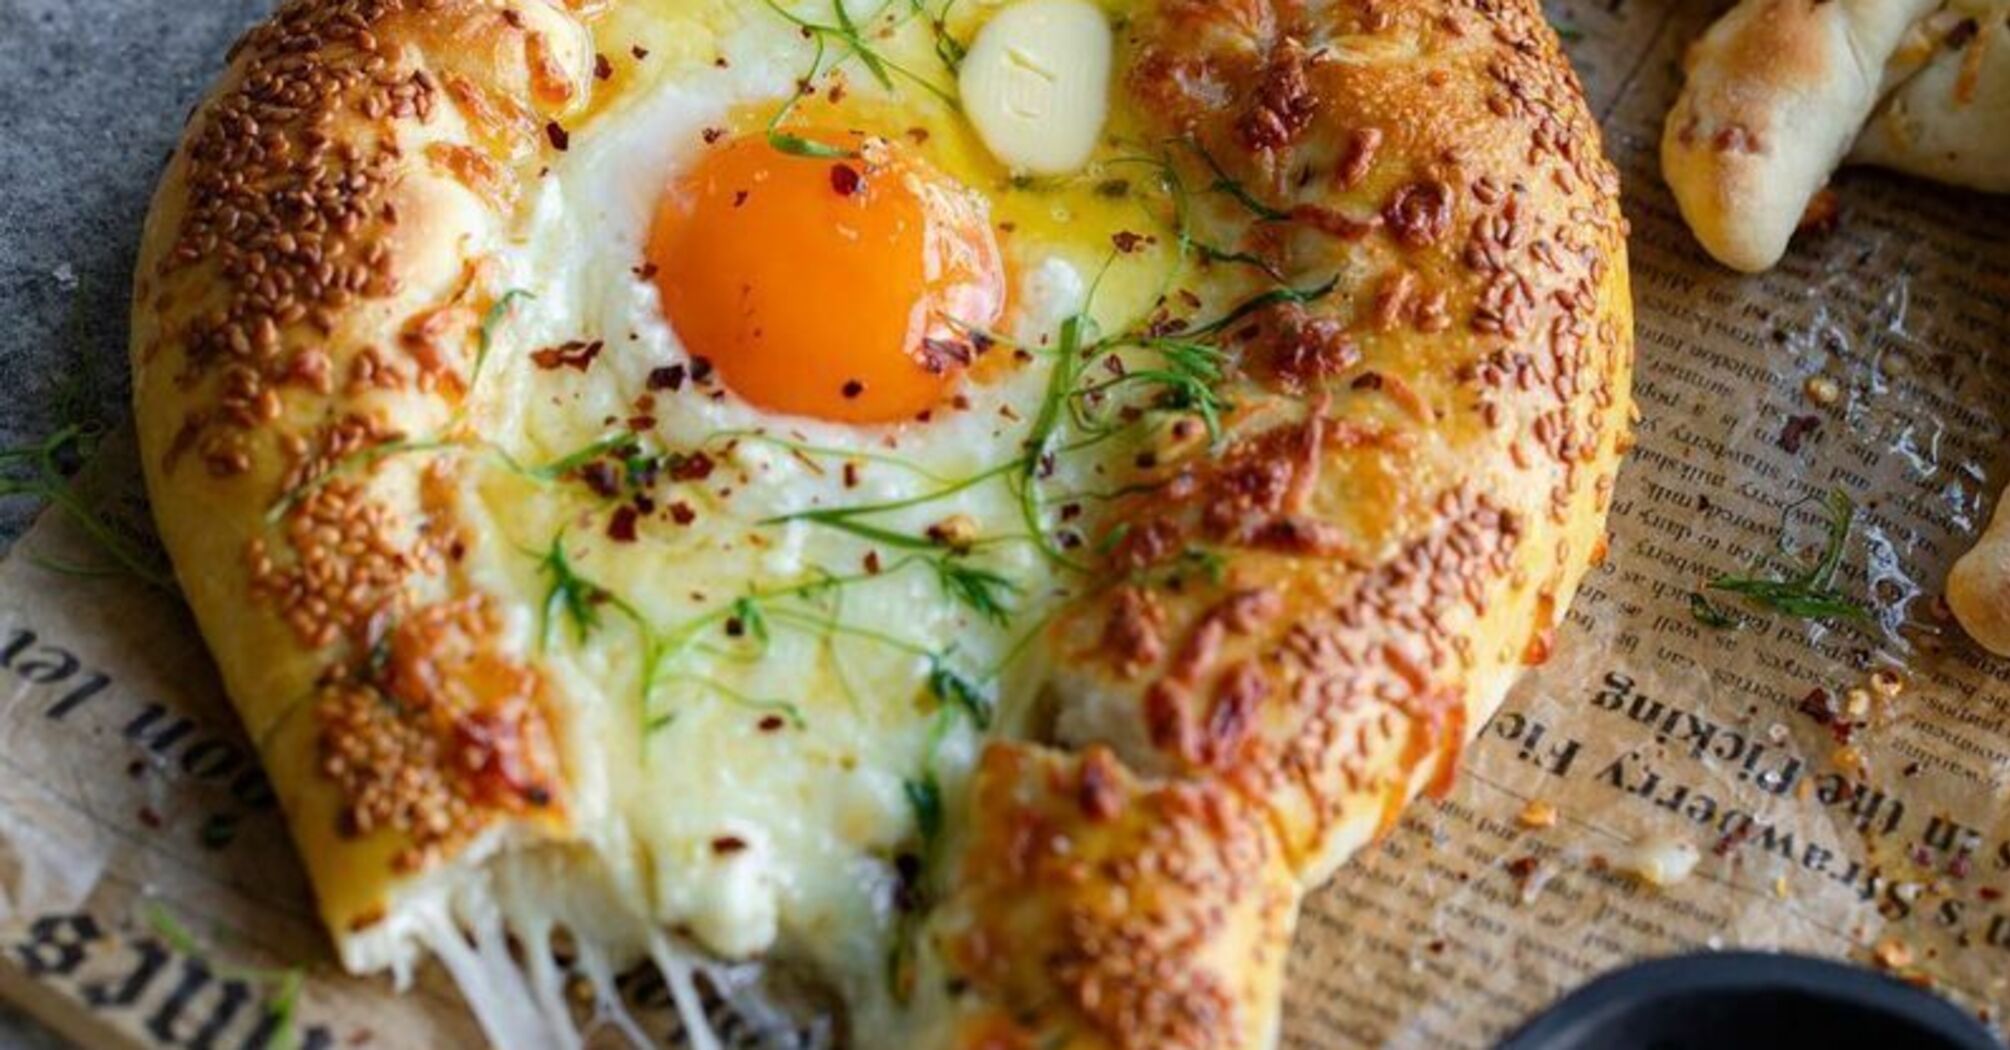 No-dough lazy khachapuri with cheese and egg yolk